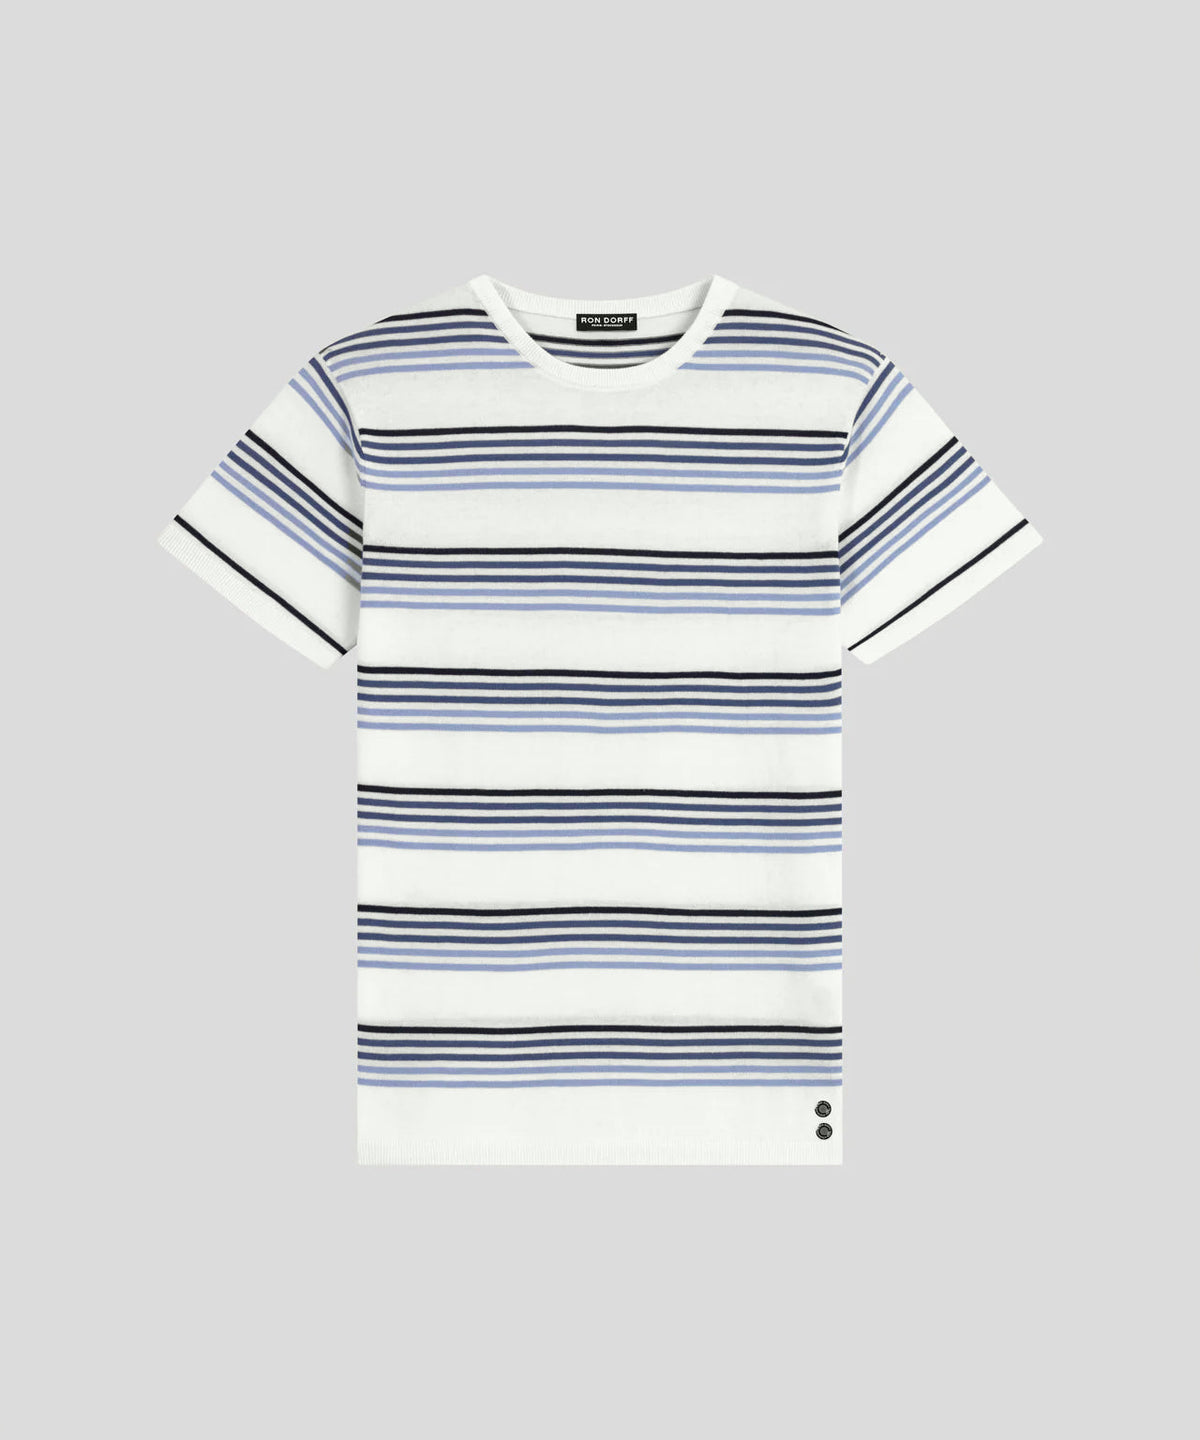 Knitted Striped T-Shirt: Off White